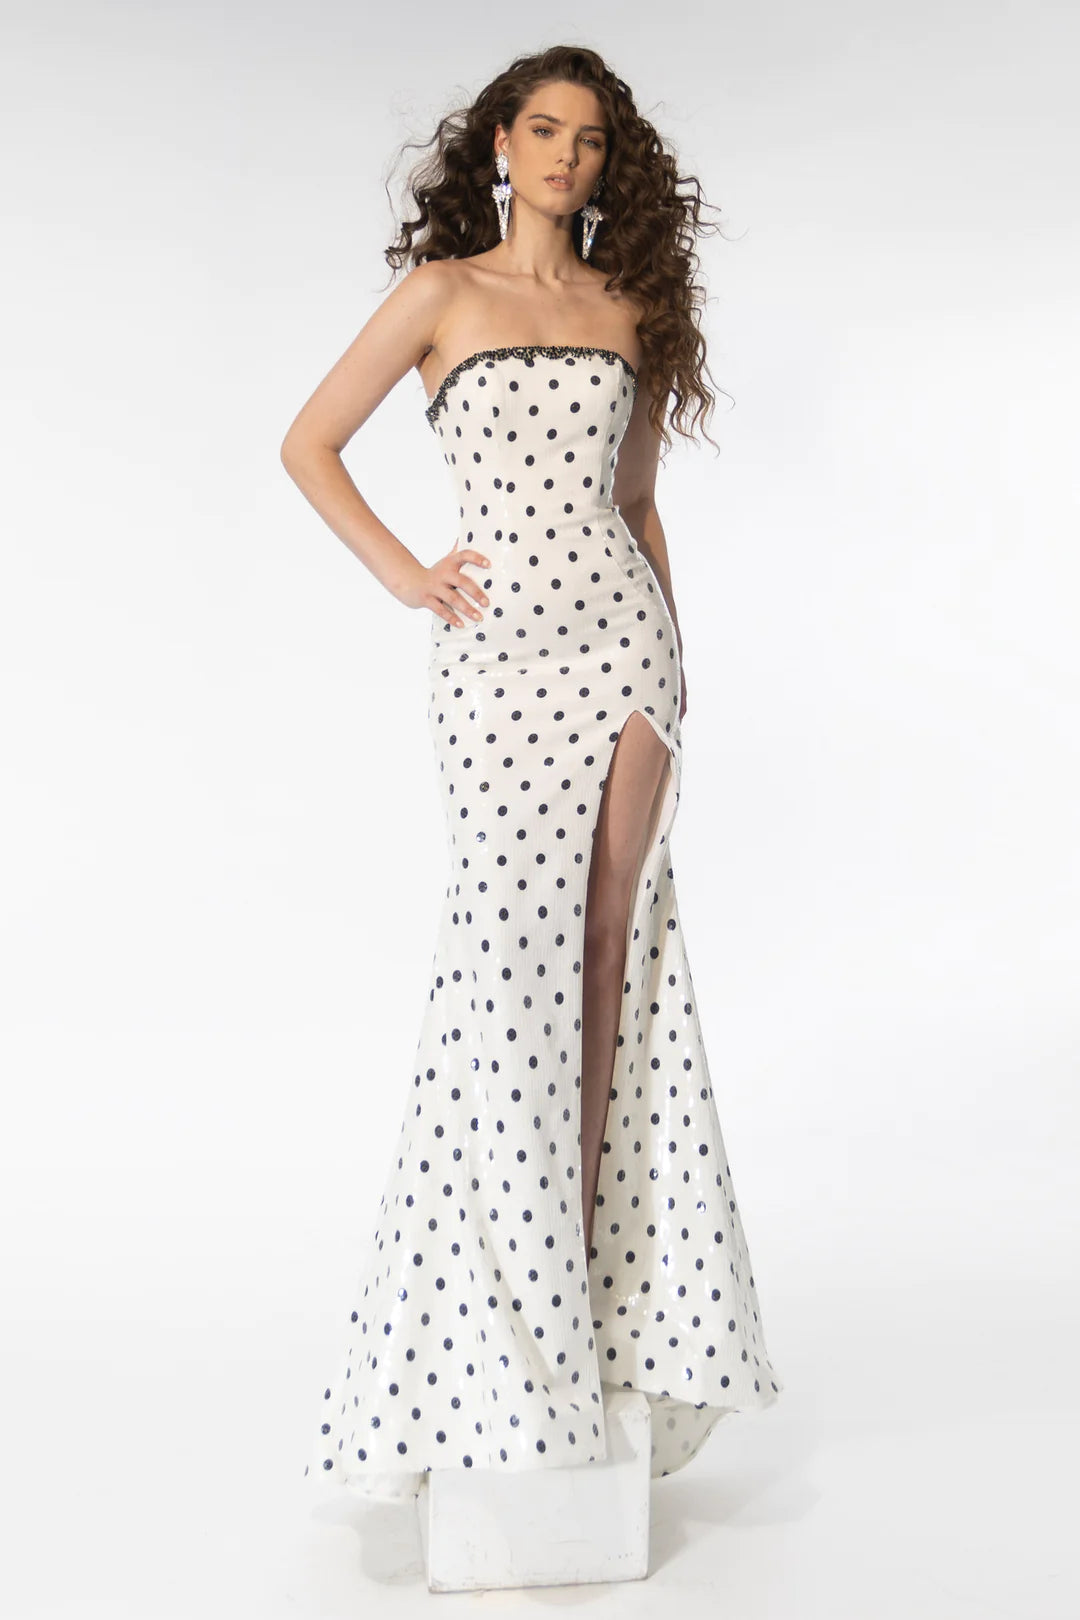 Dazzle the crowd in the stunning Ava Presley 39253 prom dress. Its strapless design and high slit add a touch of sophistication, while the sequin polka dot print and crystal detailing make it a showstopper. Be the belle of the ball in this formal gown.